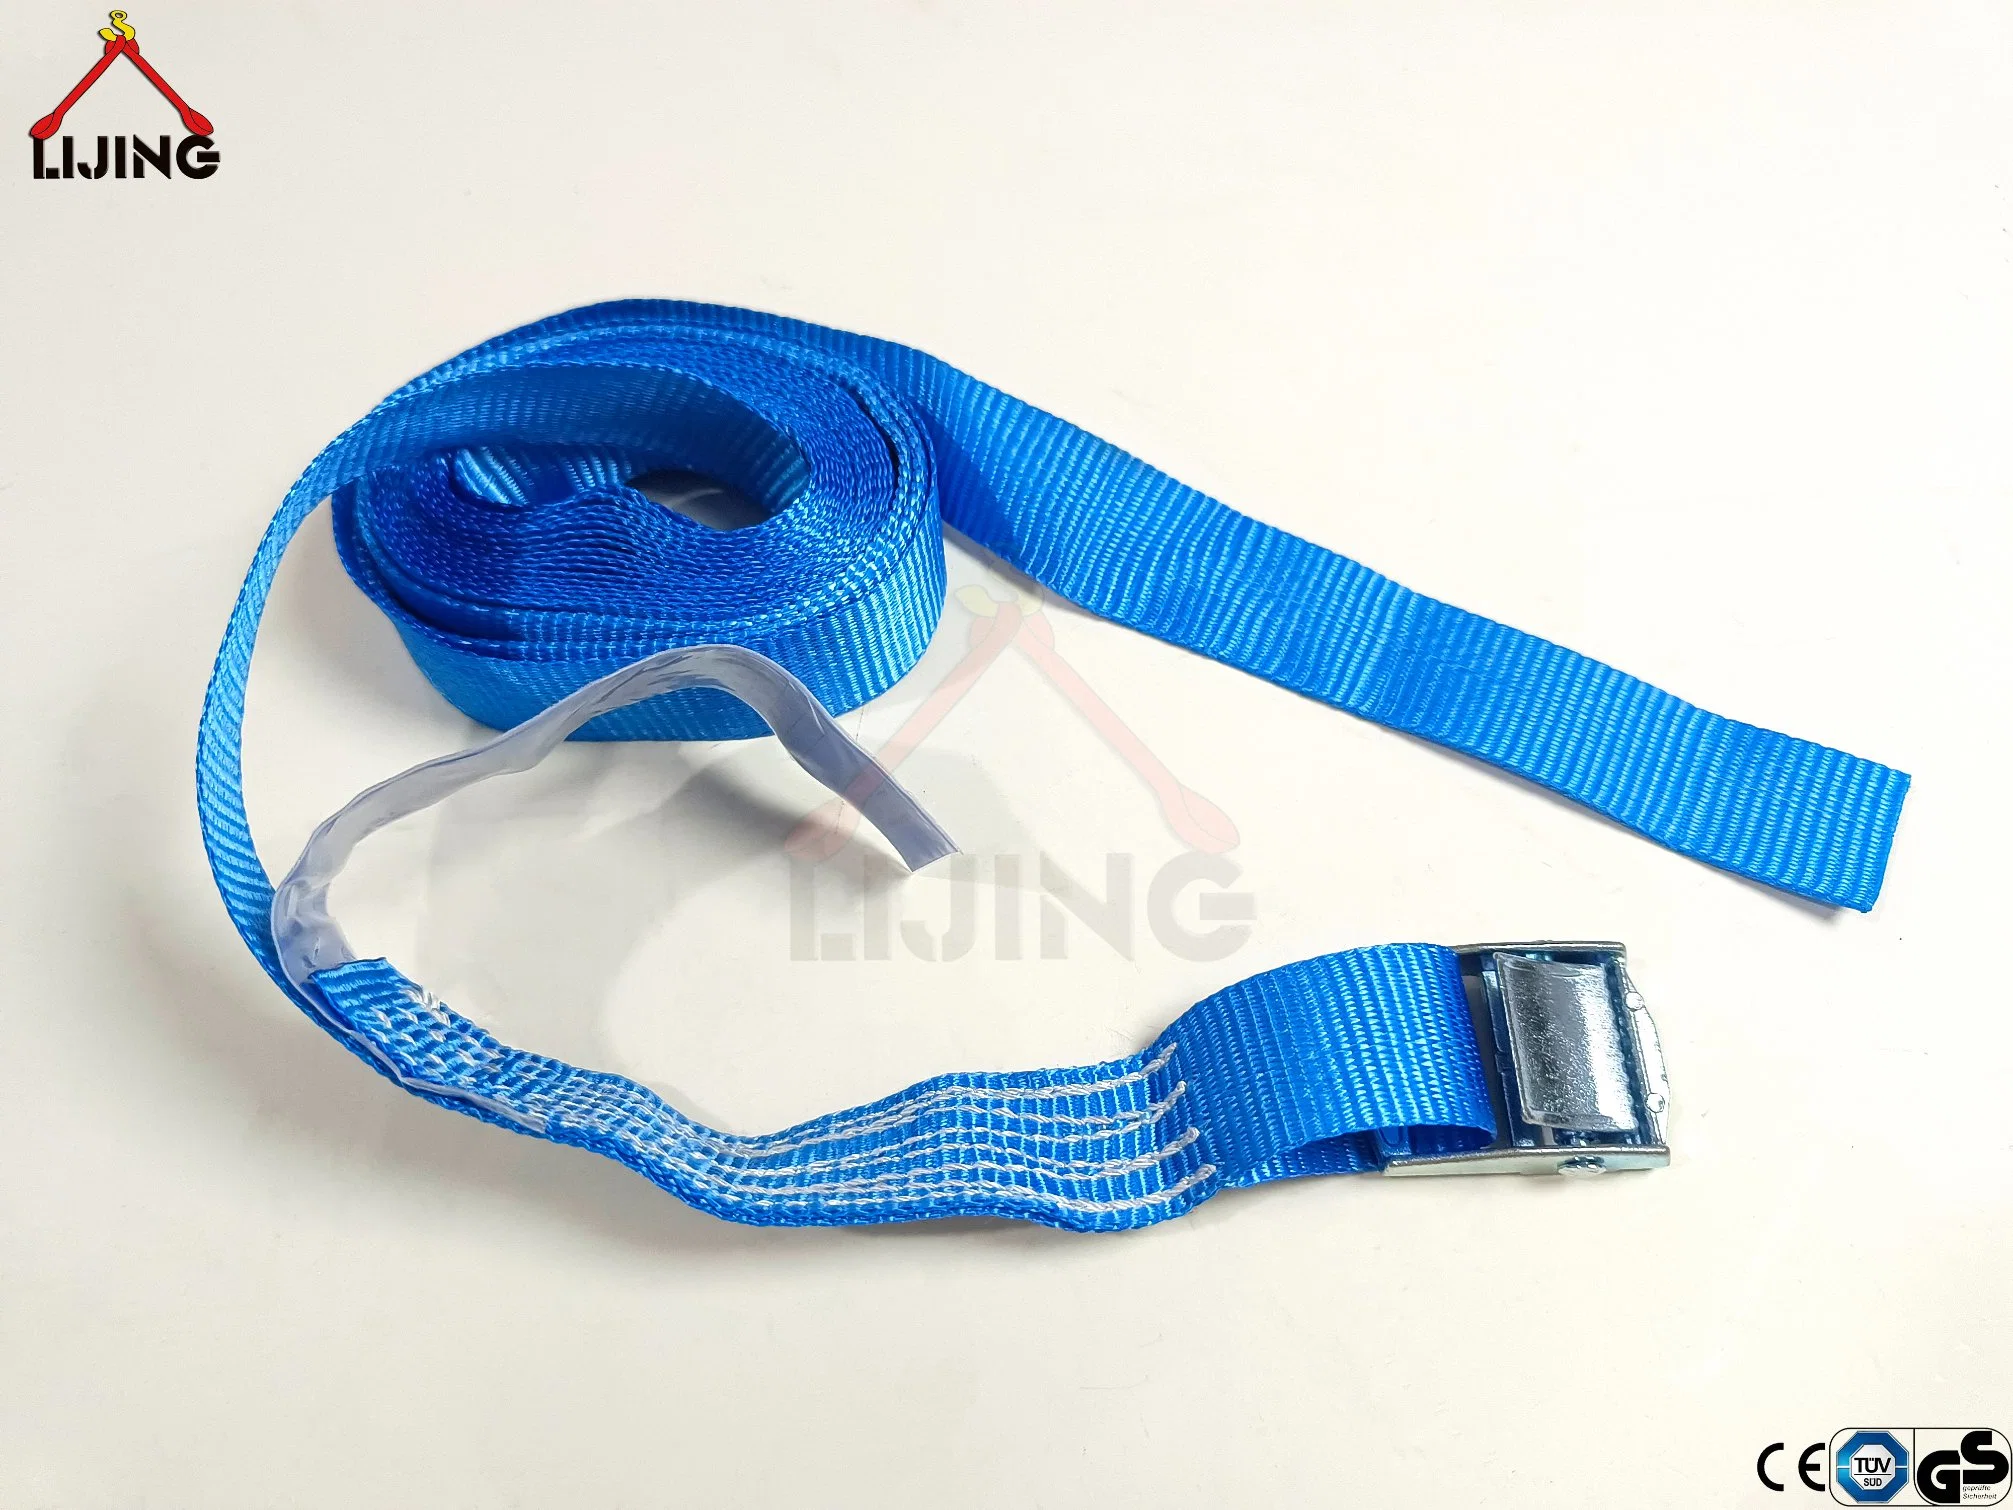 25mm Cam Buckle Tie Down Straps 200kgs Polyester Webbing for Safety Belt Tie Down Heavy Duty Strap